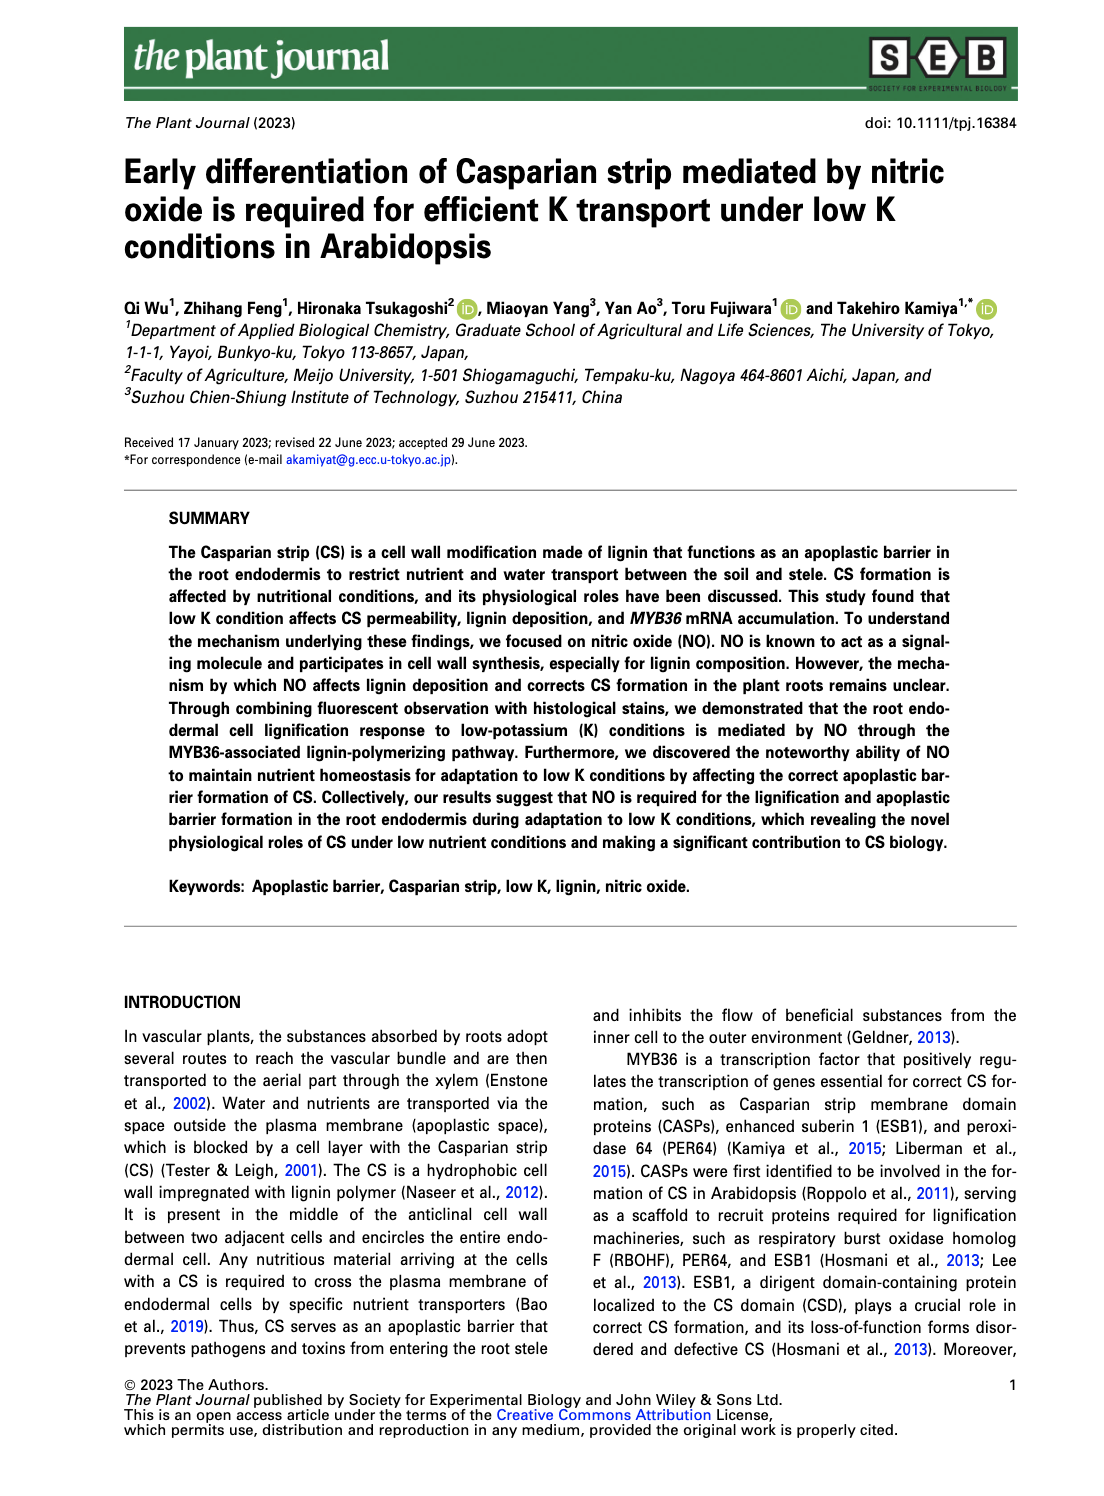 2023 2023 Early  differentiation  of  Casparian  strip  mediated  by  nitric  oxide  is  required  forefficient K transport under low K conditions in Arabidopsis.png